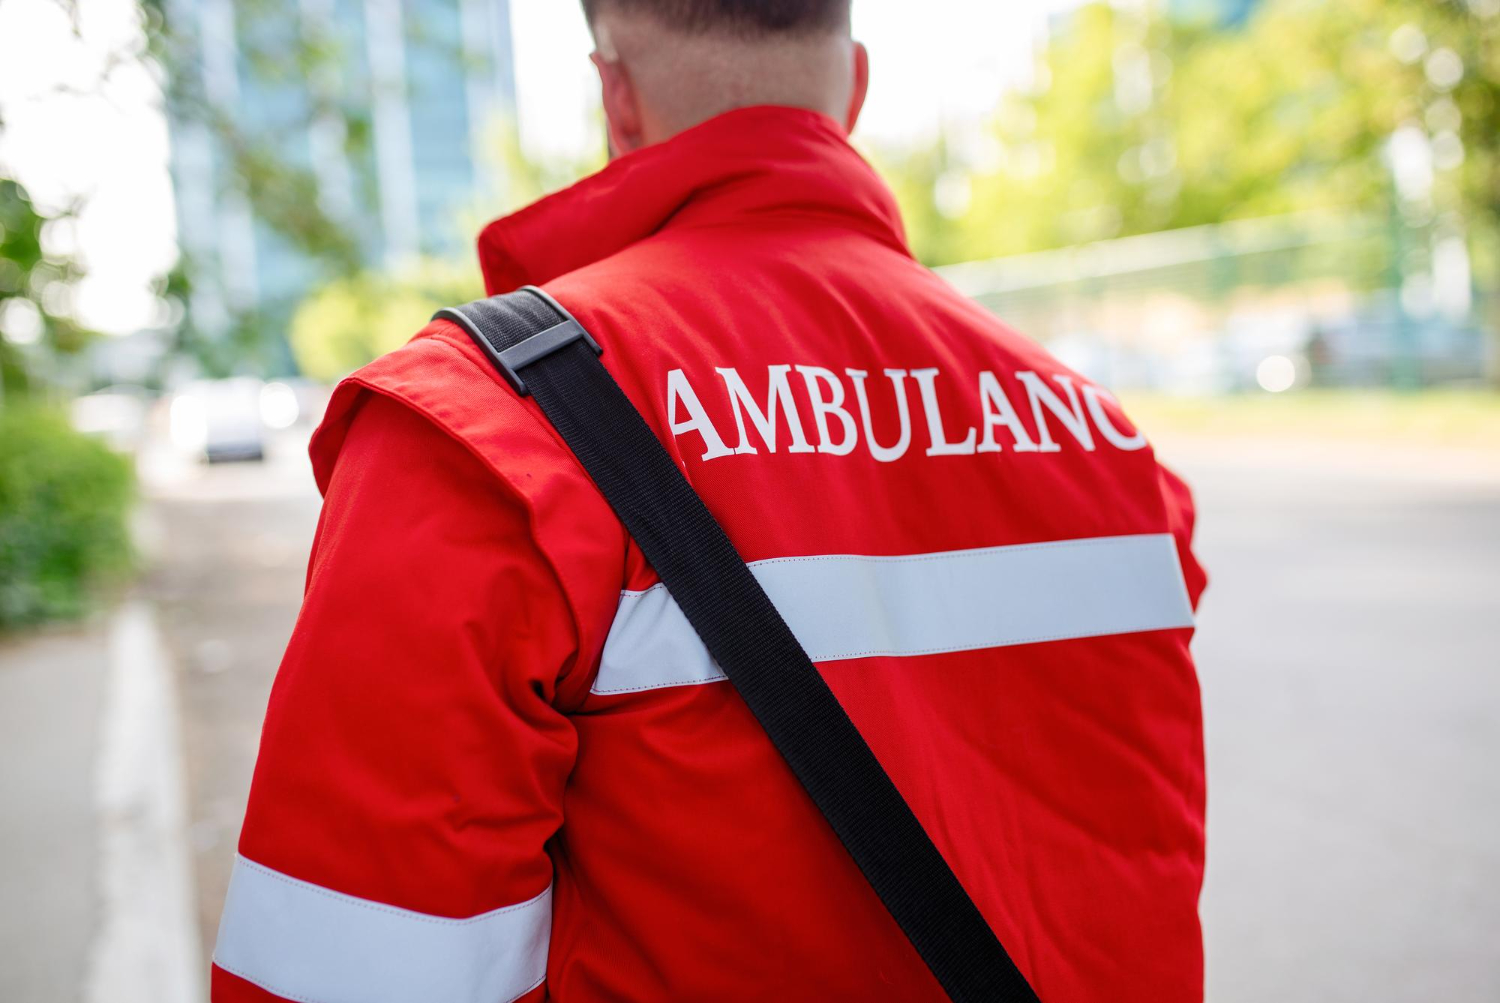 A paramedic stands with his back to the camera. He's wearing a red jacket with the word "ambulance" on the back, along with high-vis strips, and a medical bag strap over his shoulder.